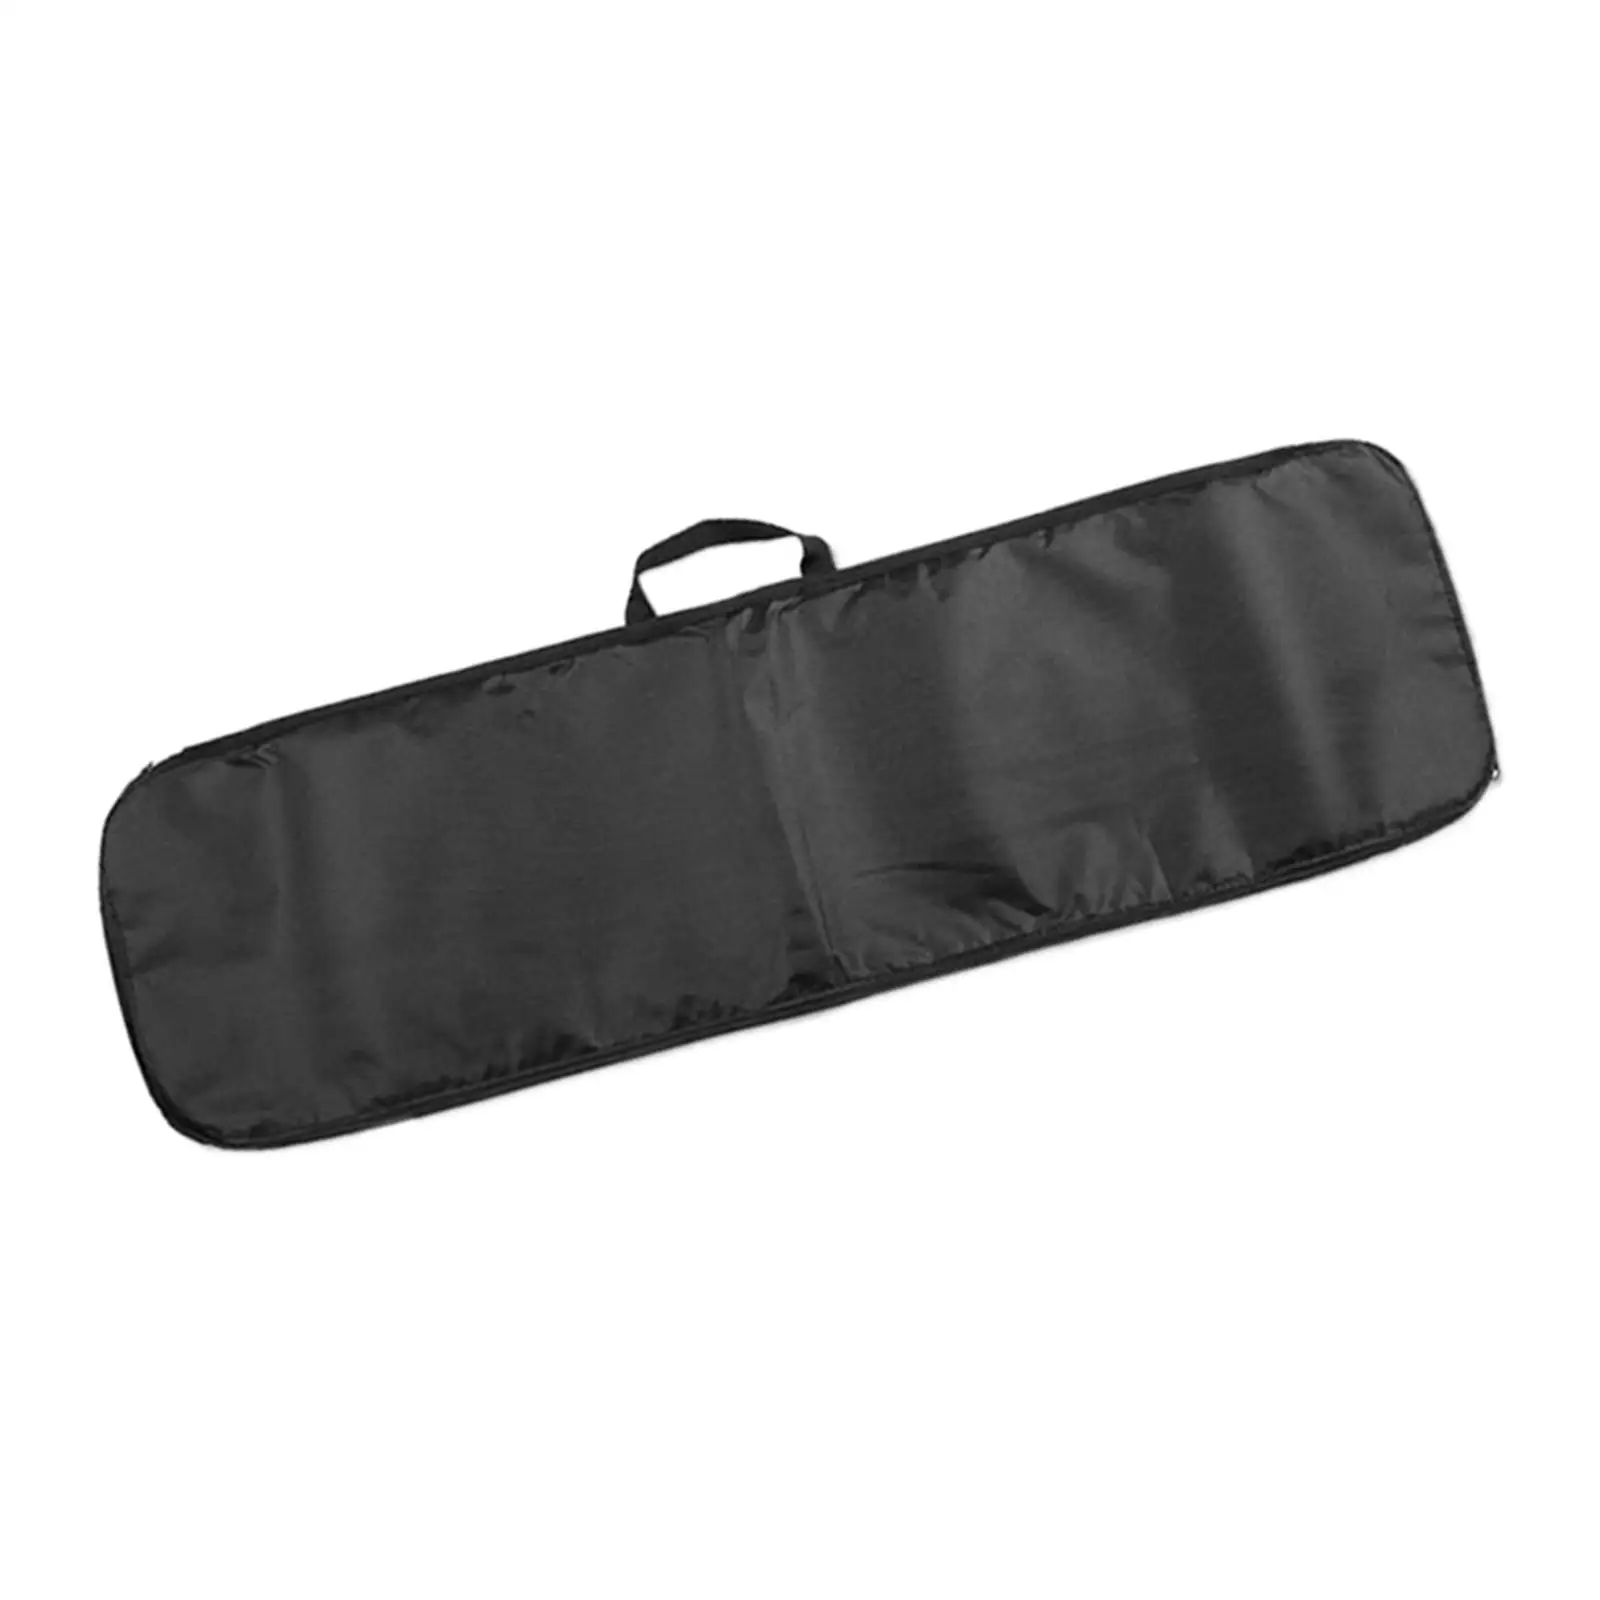 Portable Kayak Paddle Bag Storage Holder Paddle Blade Case with Handles Carrying Pouch Cover Tote for Surfing Sups Boating Canoe